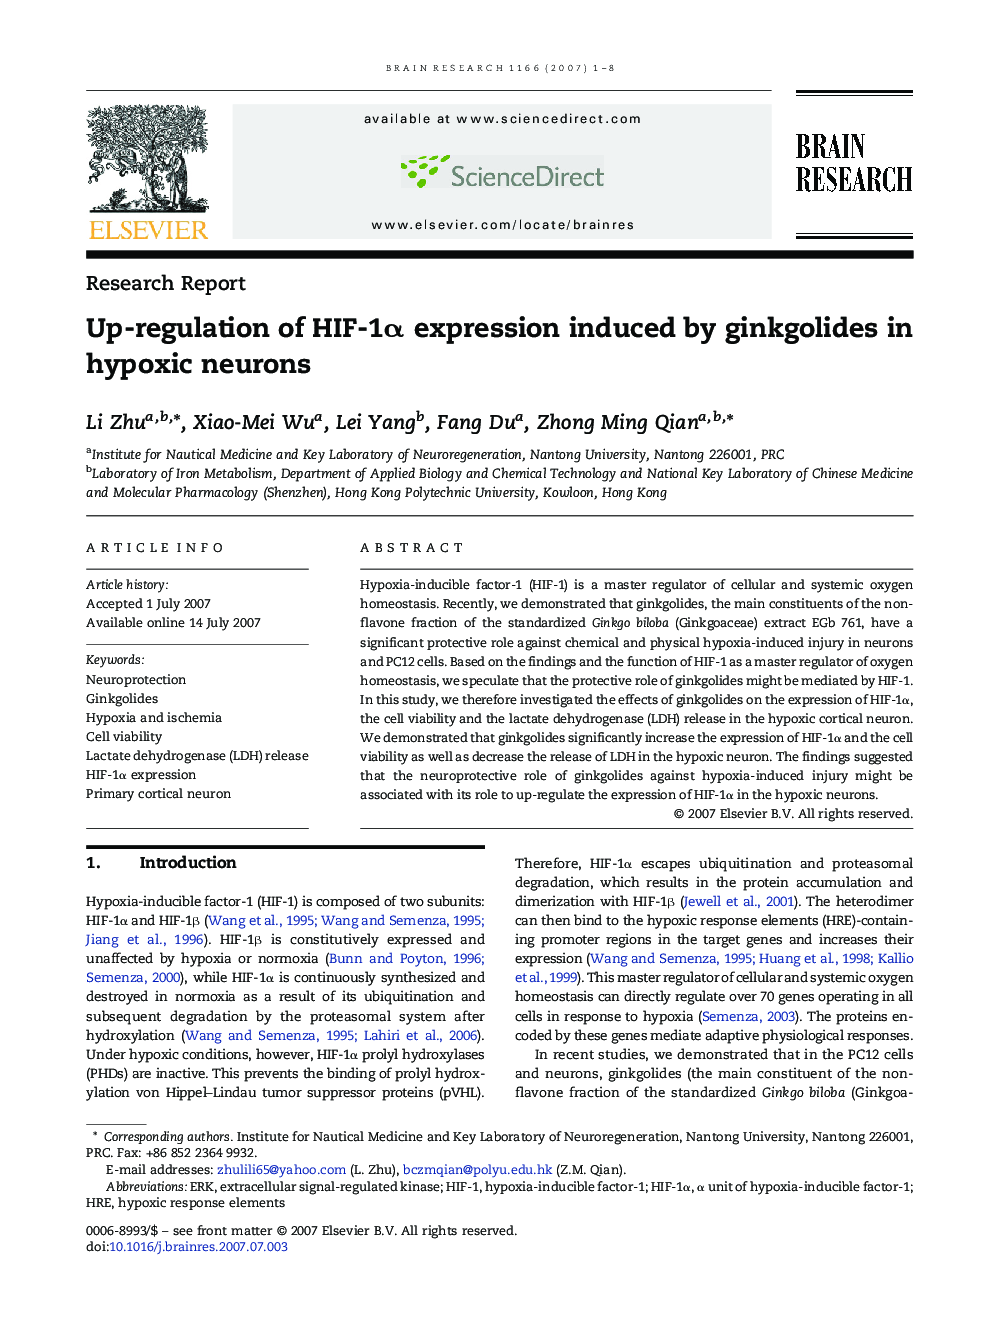 Up-regulation of HIF-1α expression induced by ginkgolides in hypoxic neurons